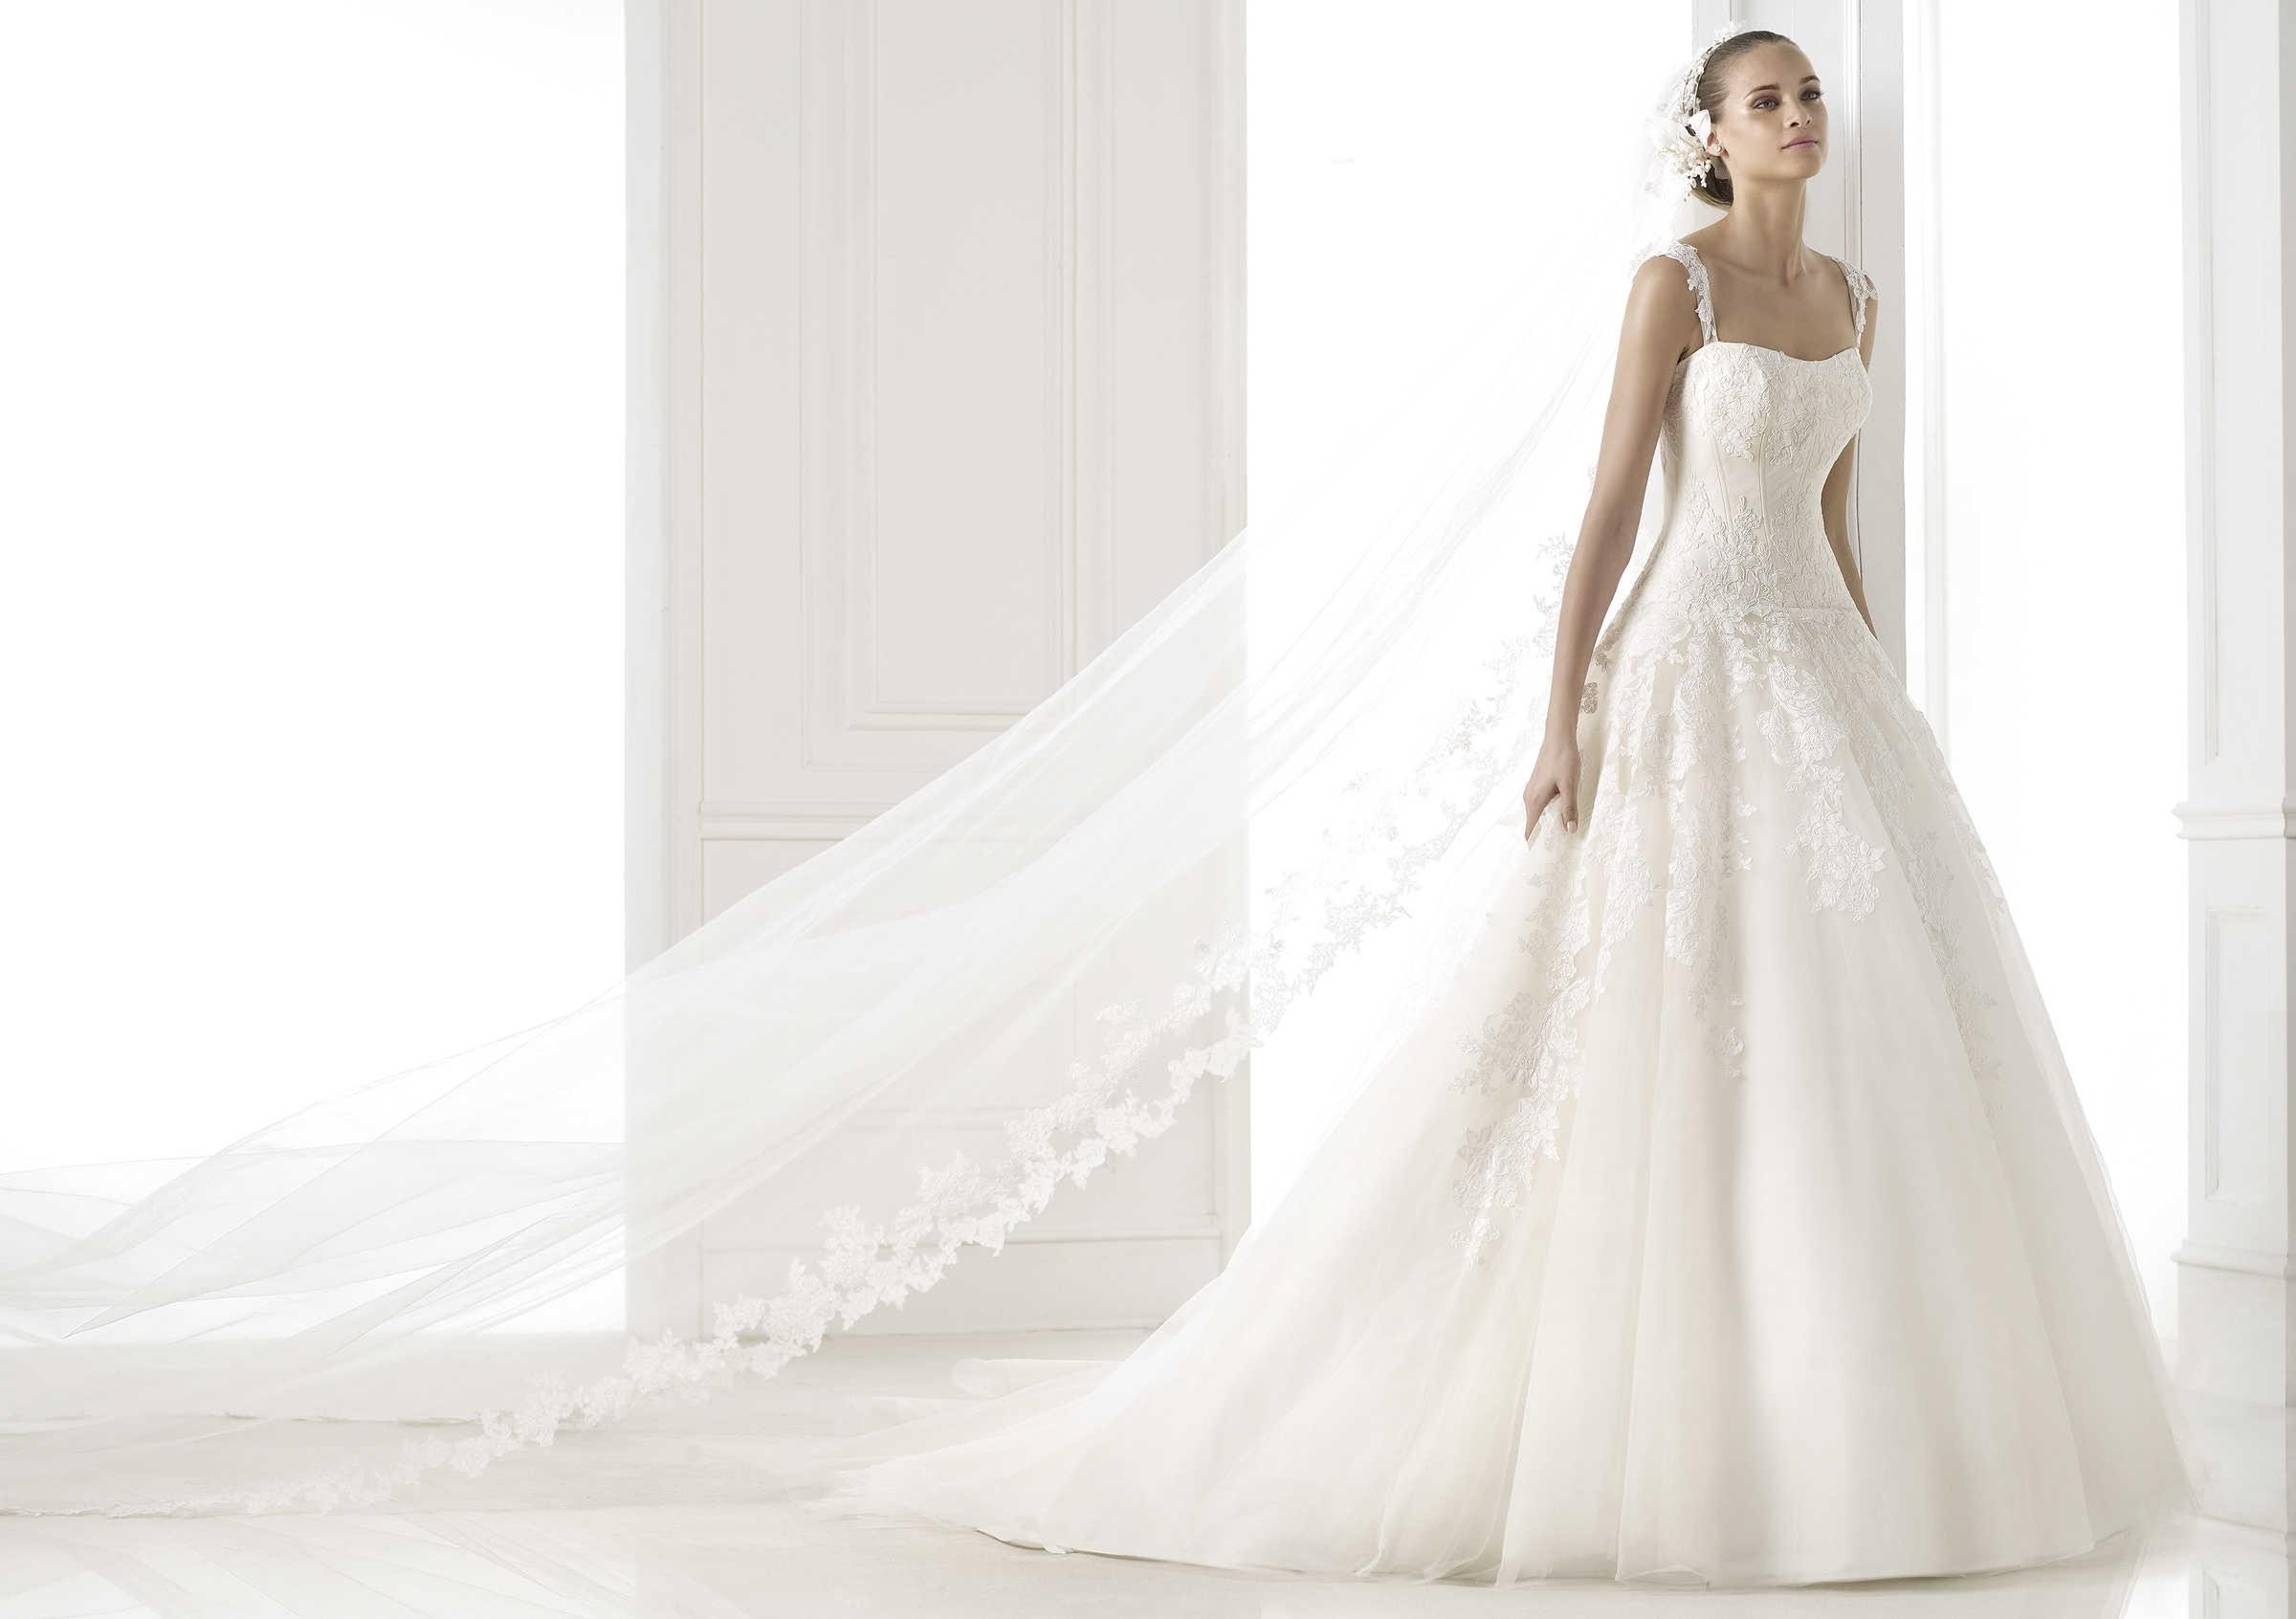 Preowned Wedding Dresses
 Used Wedding Dresses Buy & Sell Your Wedding Dress